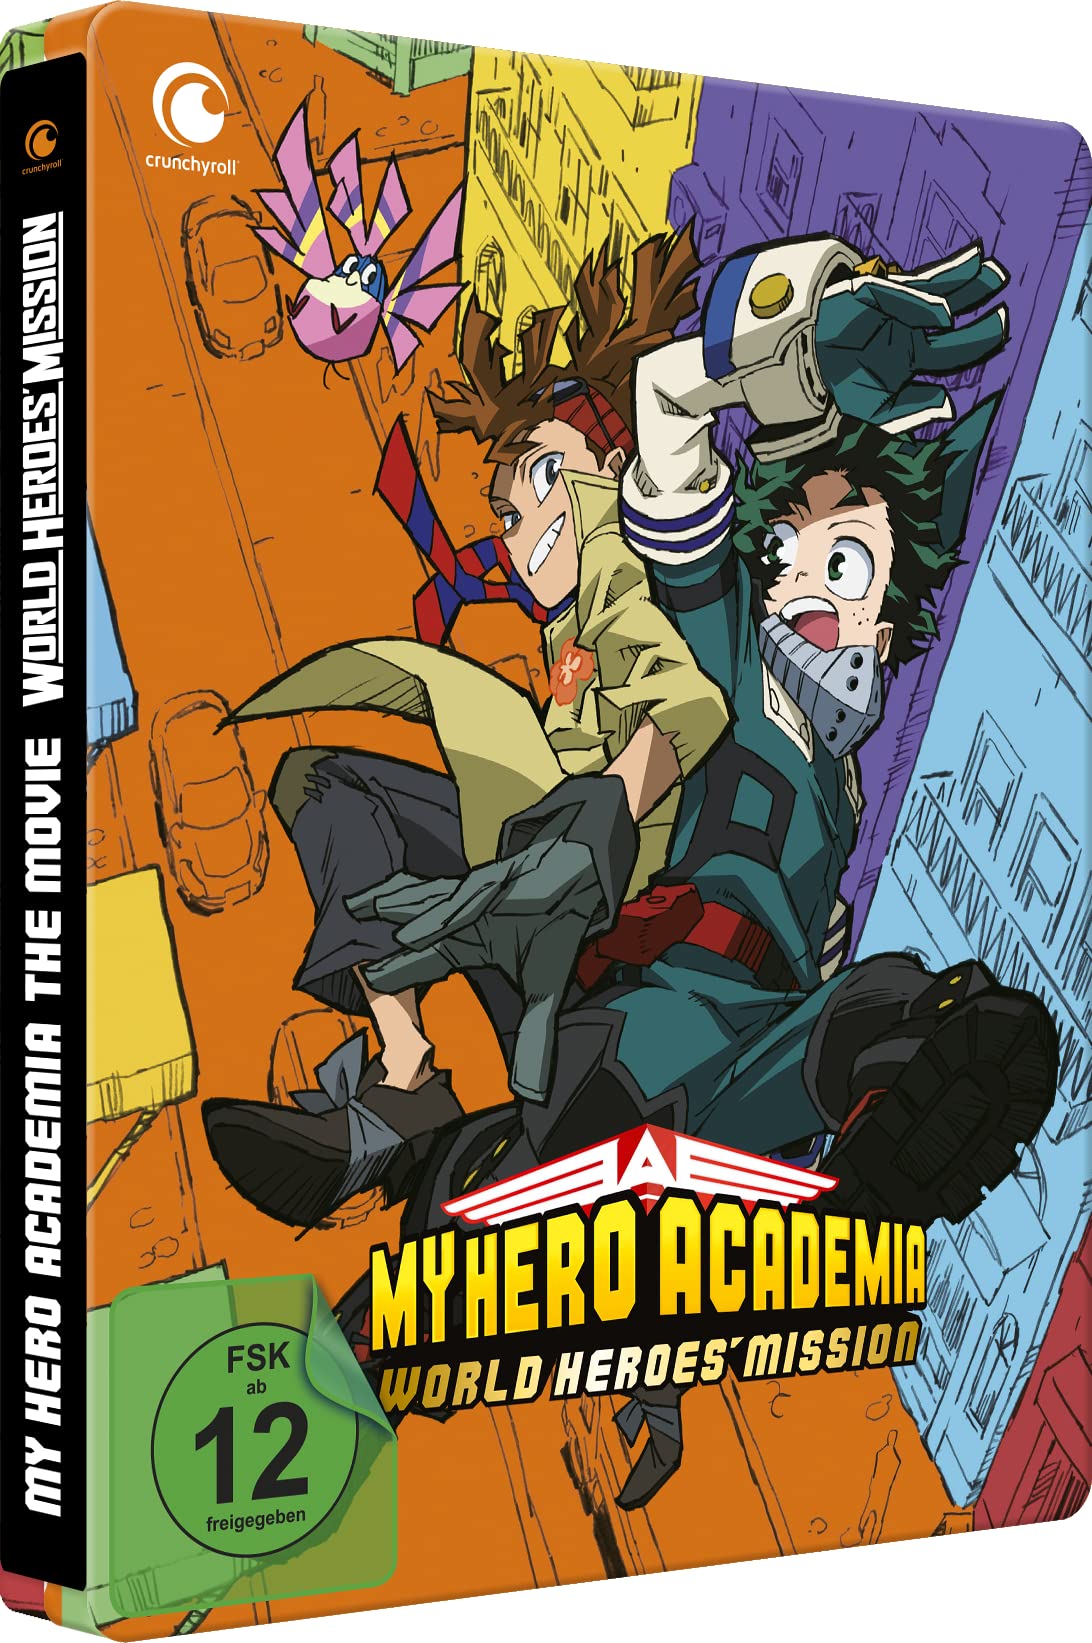 My Hero Academia: World Heroes' Mission - The Movie - [Blu-ray] Steelbook - Limited Edition